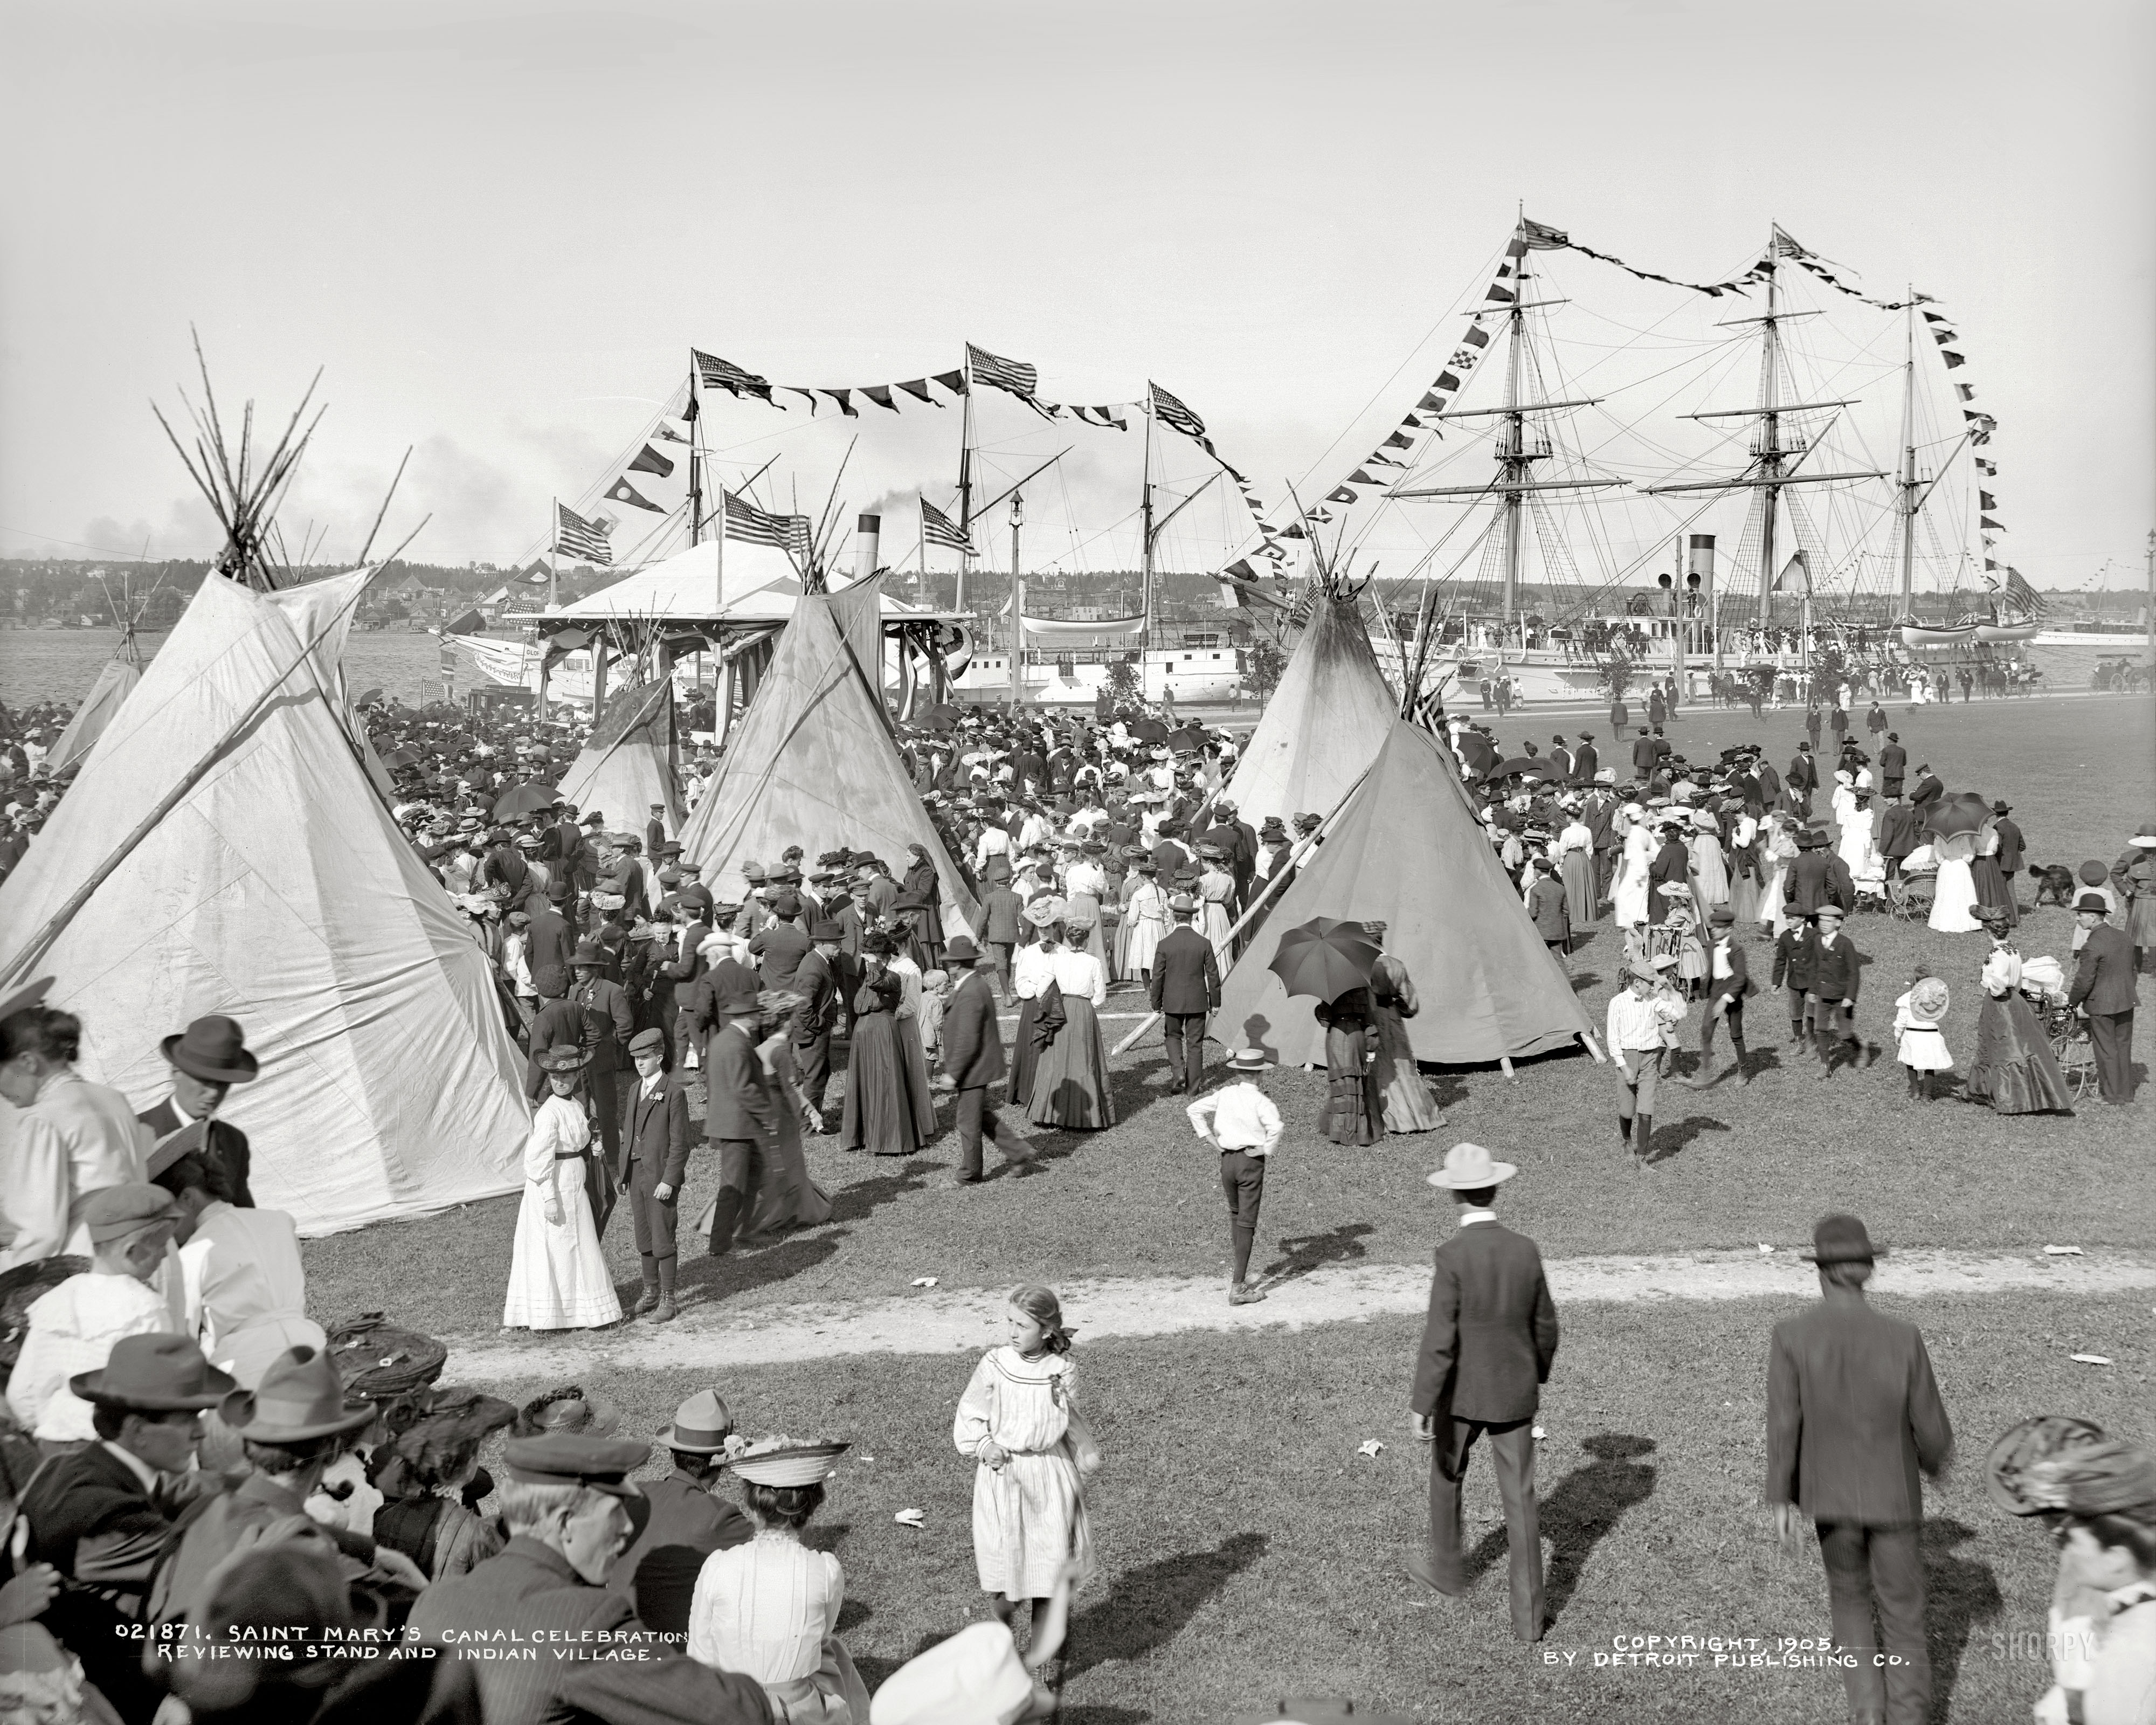 Michigan circa 1905. "Sault Sainte Marie Canal celebration. Reviewing stand and Indian village." Dry plate glass negative, Detroit Publishing Co. View full size.